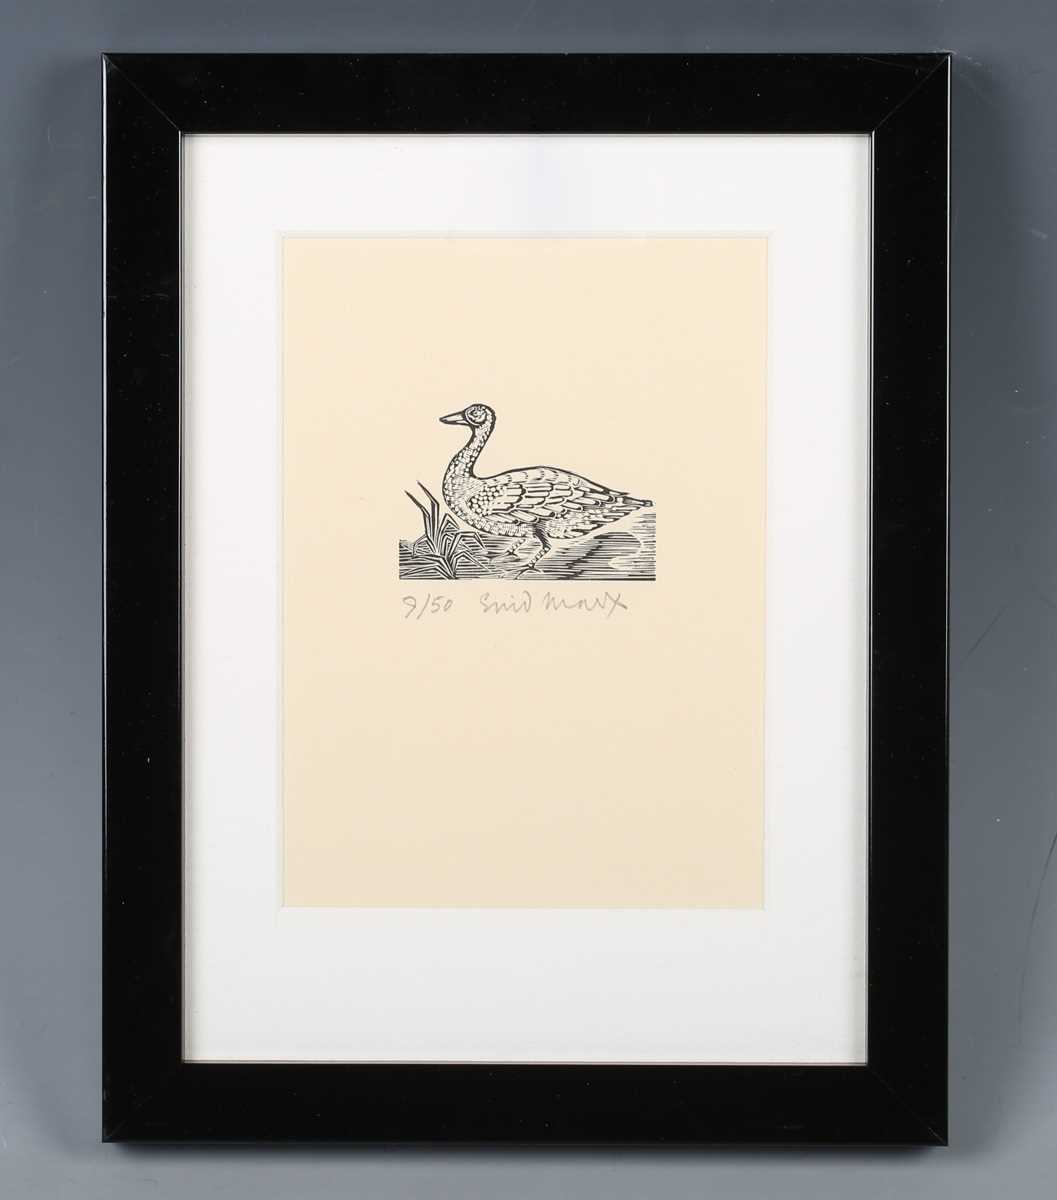 Enid Marx – ‘Goosey, Goosey, Gander’, 20th century wood engraving, signed and editioned 9/50 in - Image 2 of 14